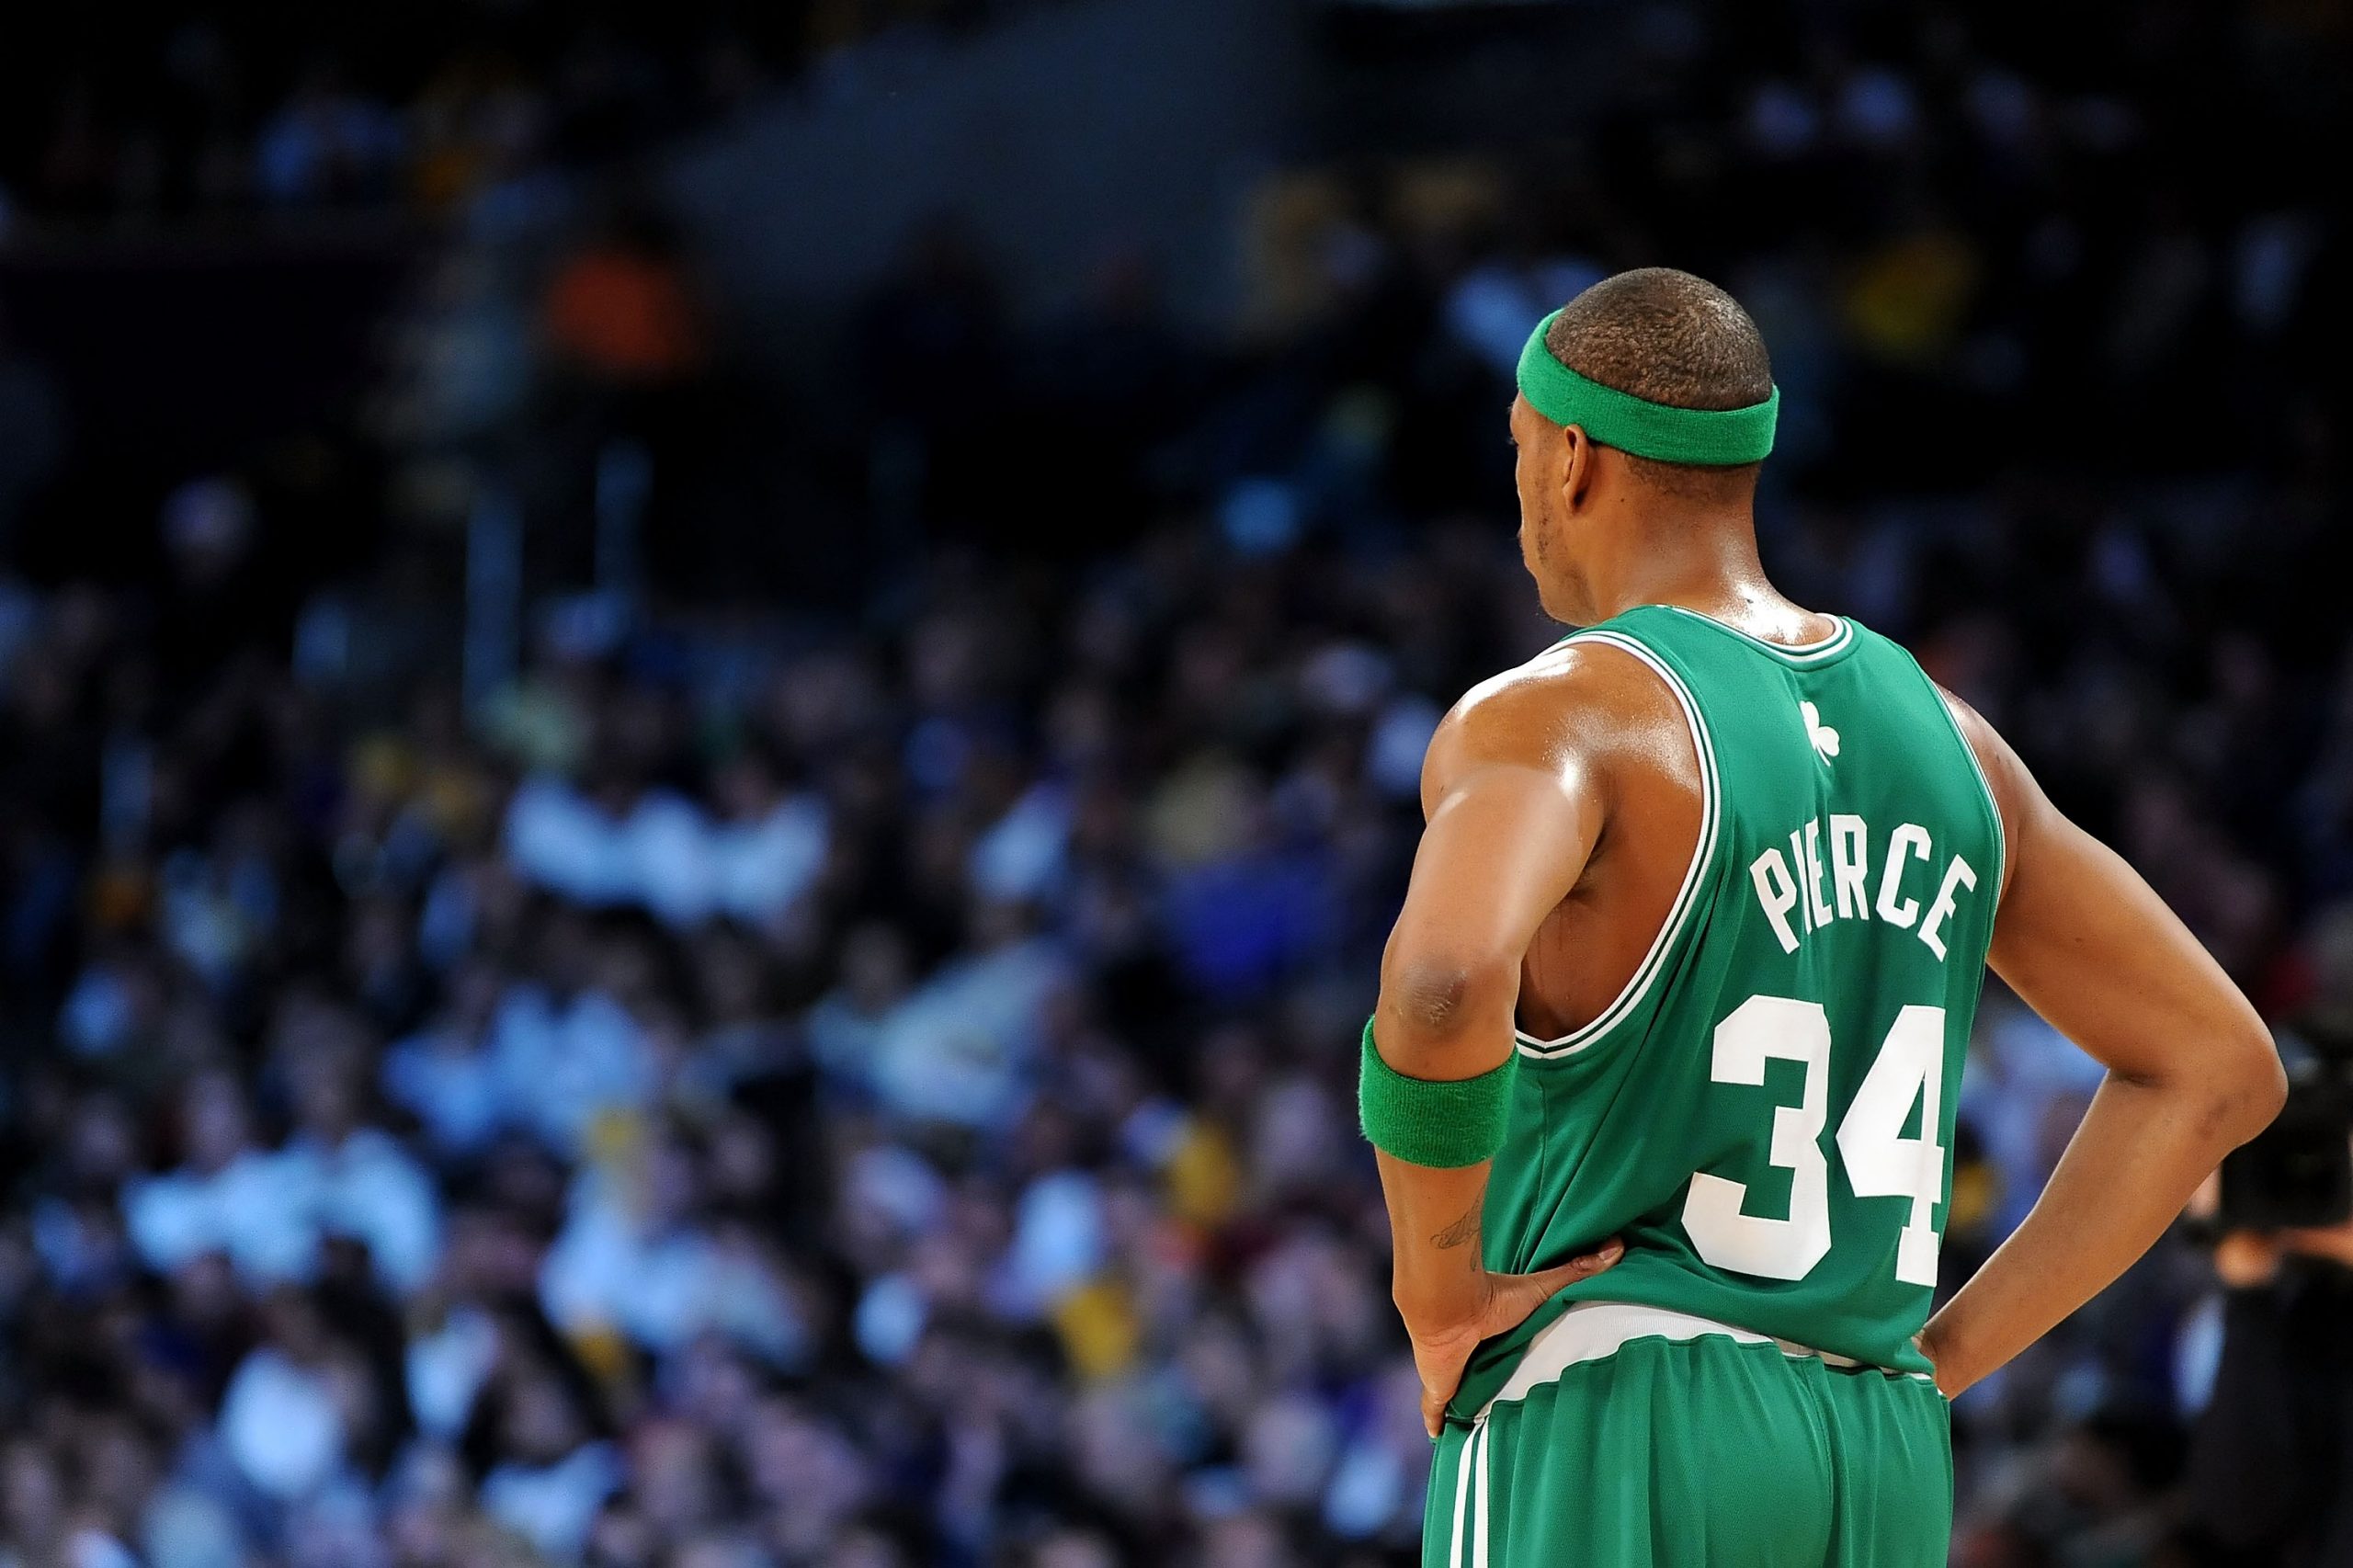 Paul Pierce of the Boston Celtics looks on during a game against the Los Angeles Lakers